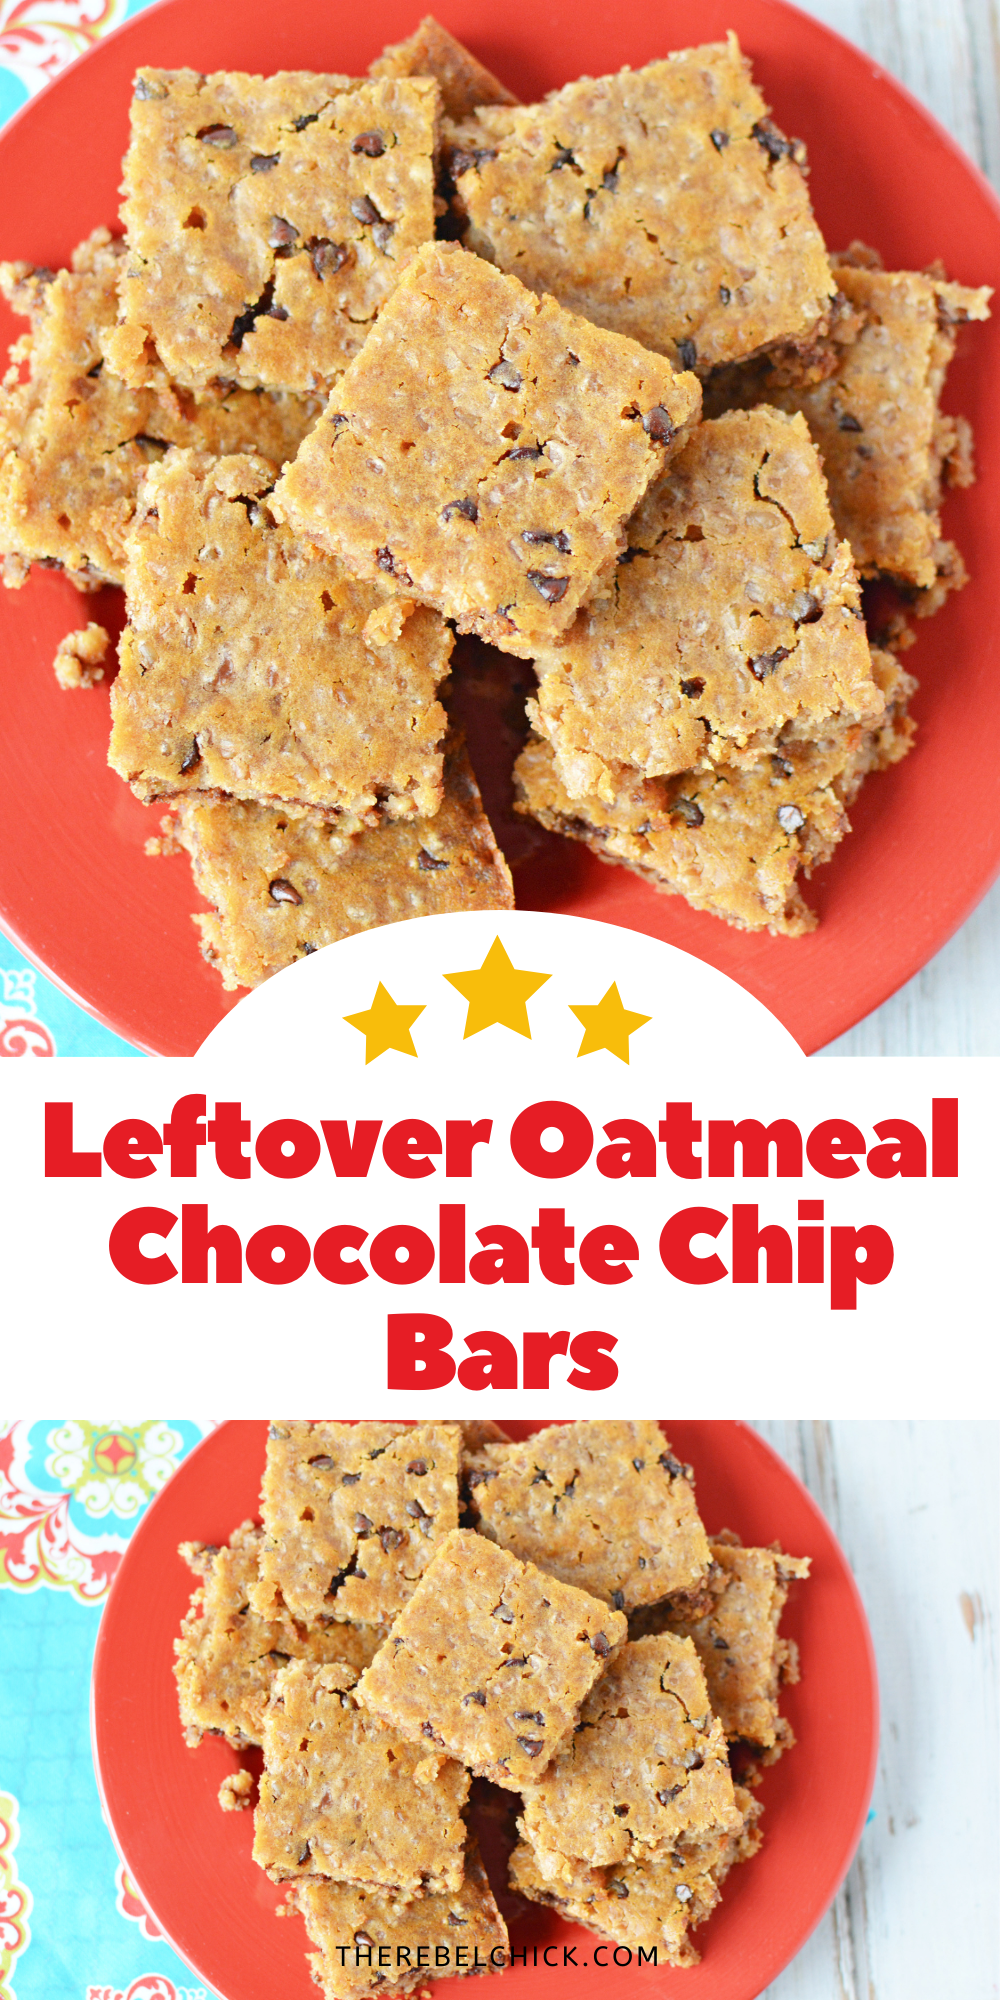 Leftover Oatmeal Chocolate Chip Bars